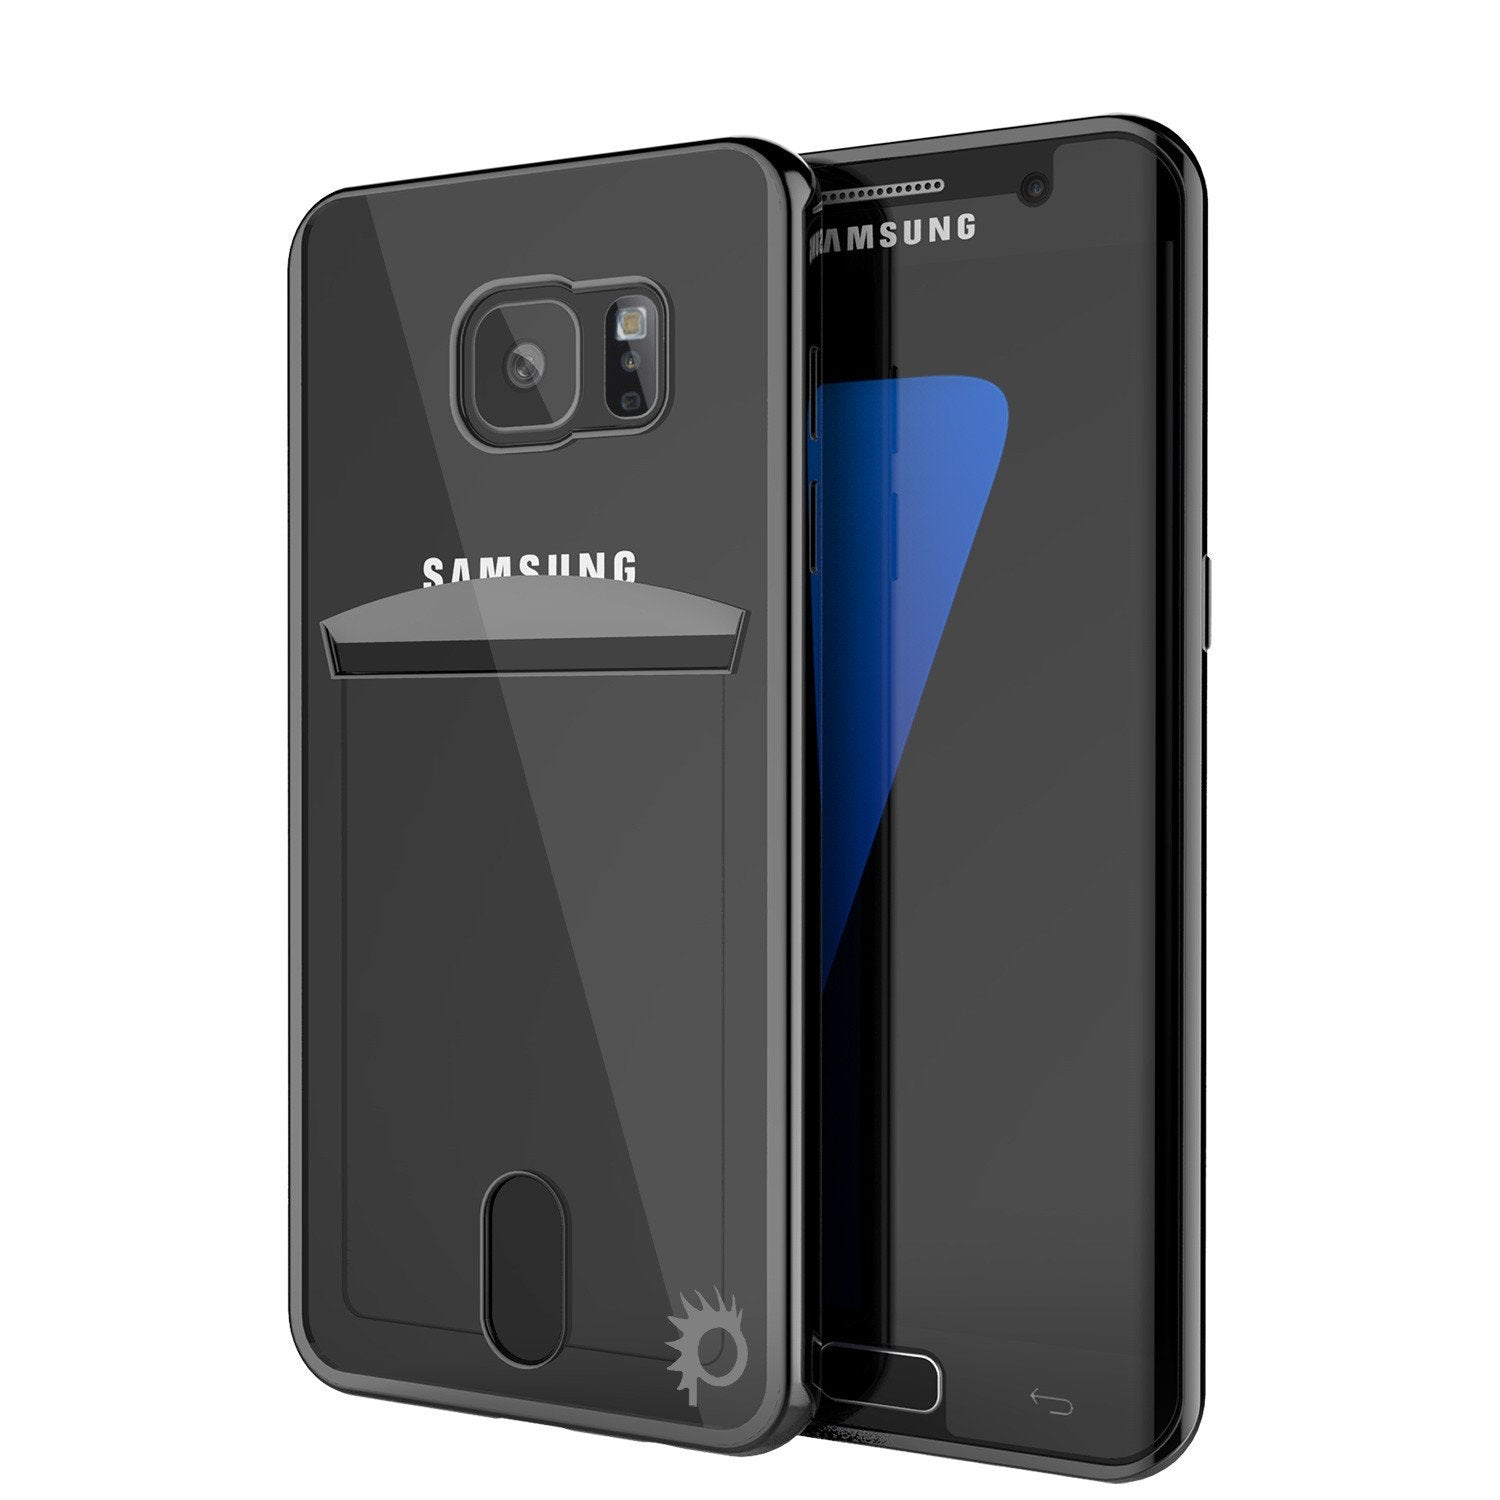 Galaxy S7 Case, PUNKCASE® LUCID Black Series | Card Slot | SHIELD Screen Protector | Ultra fit